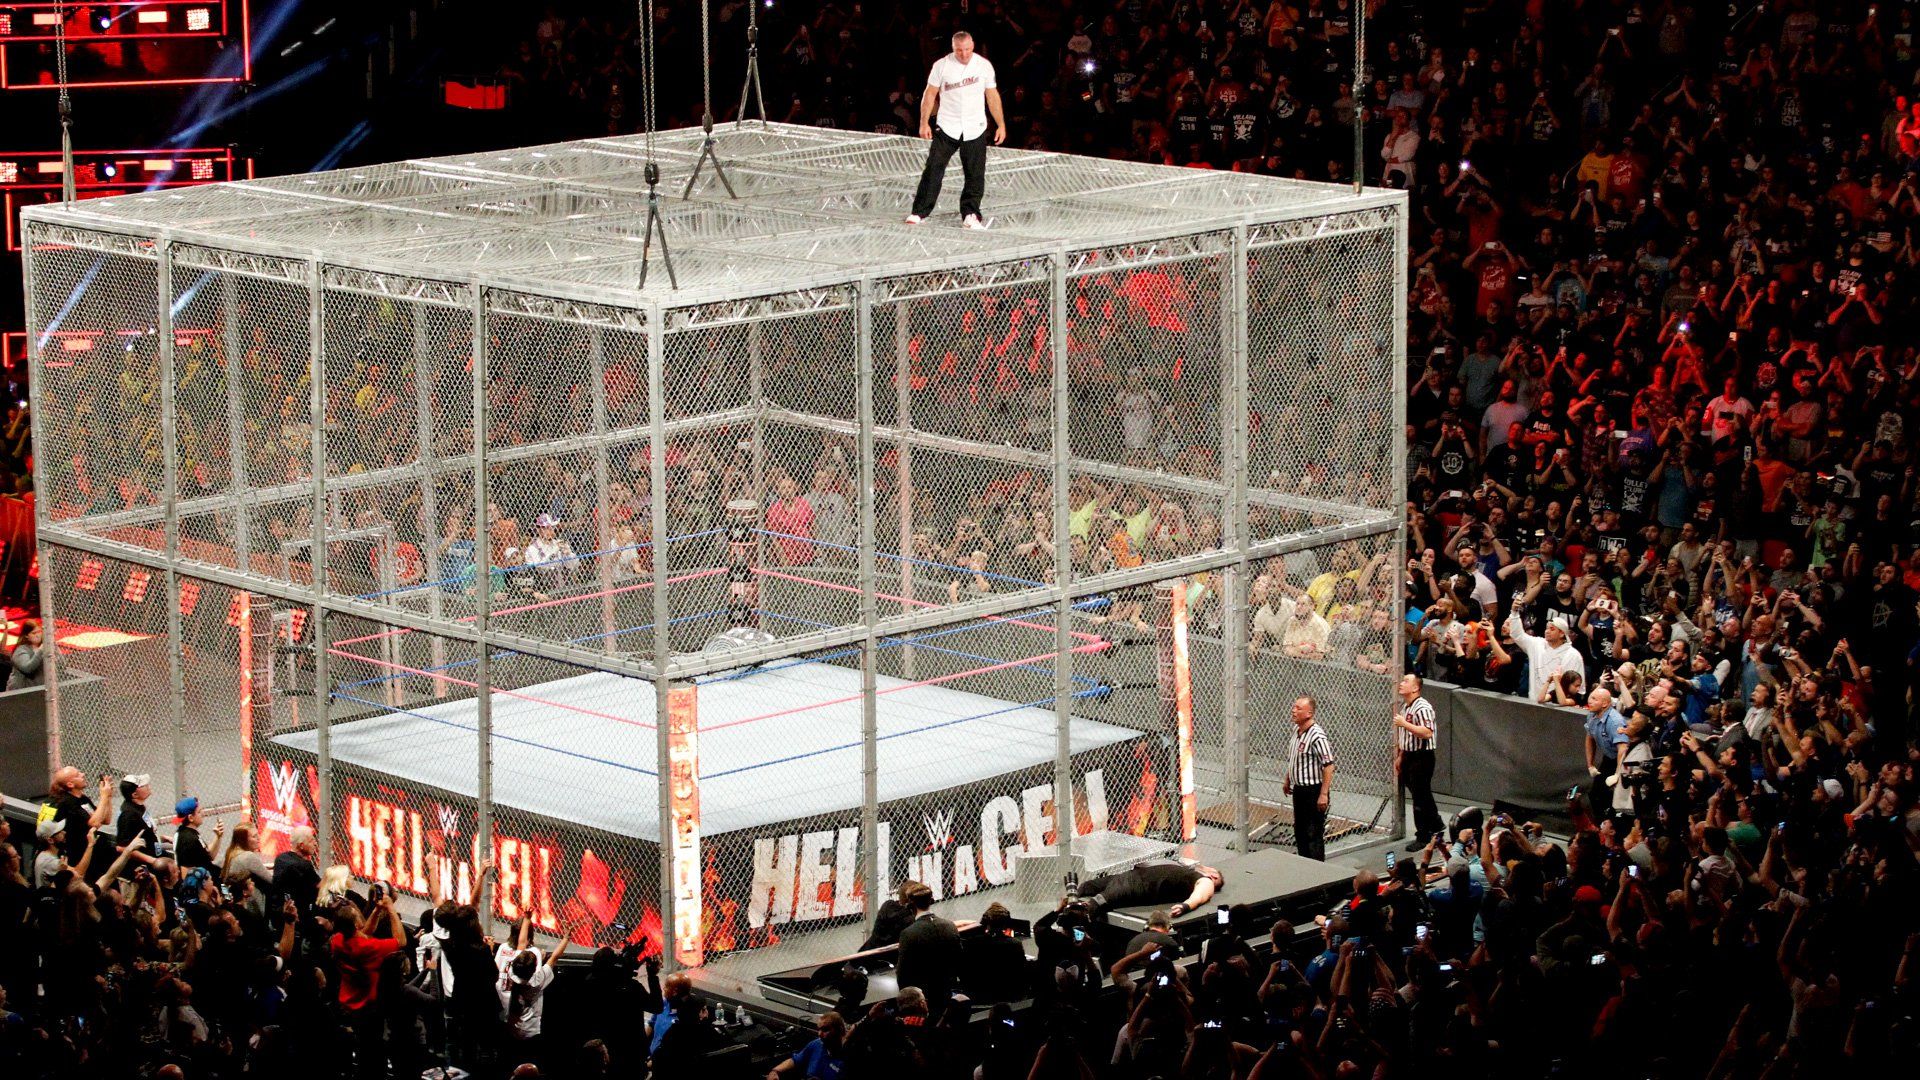 hell in a cell cage